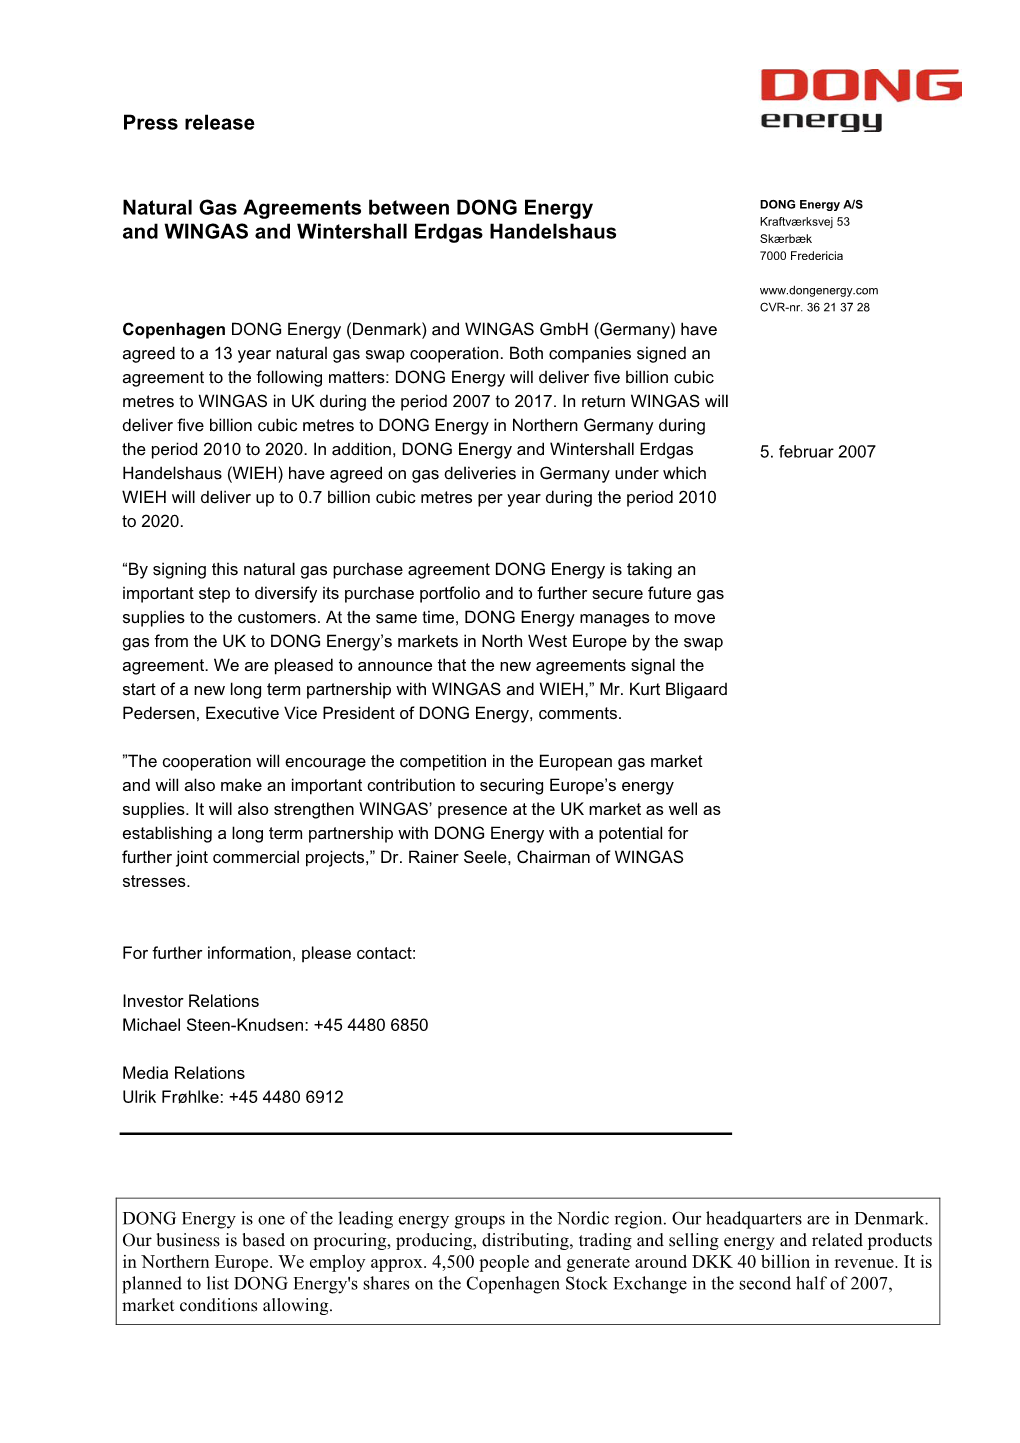 Press Release Natural Gas Agreements Between DONG